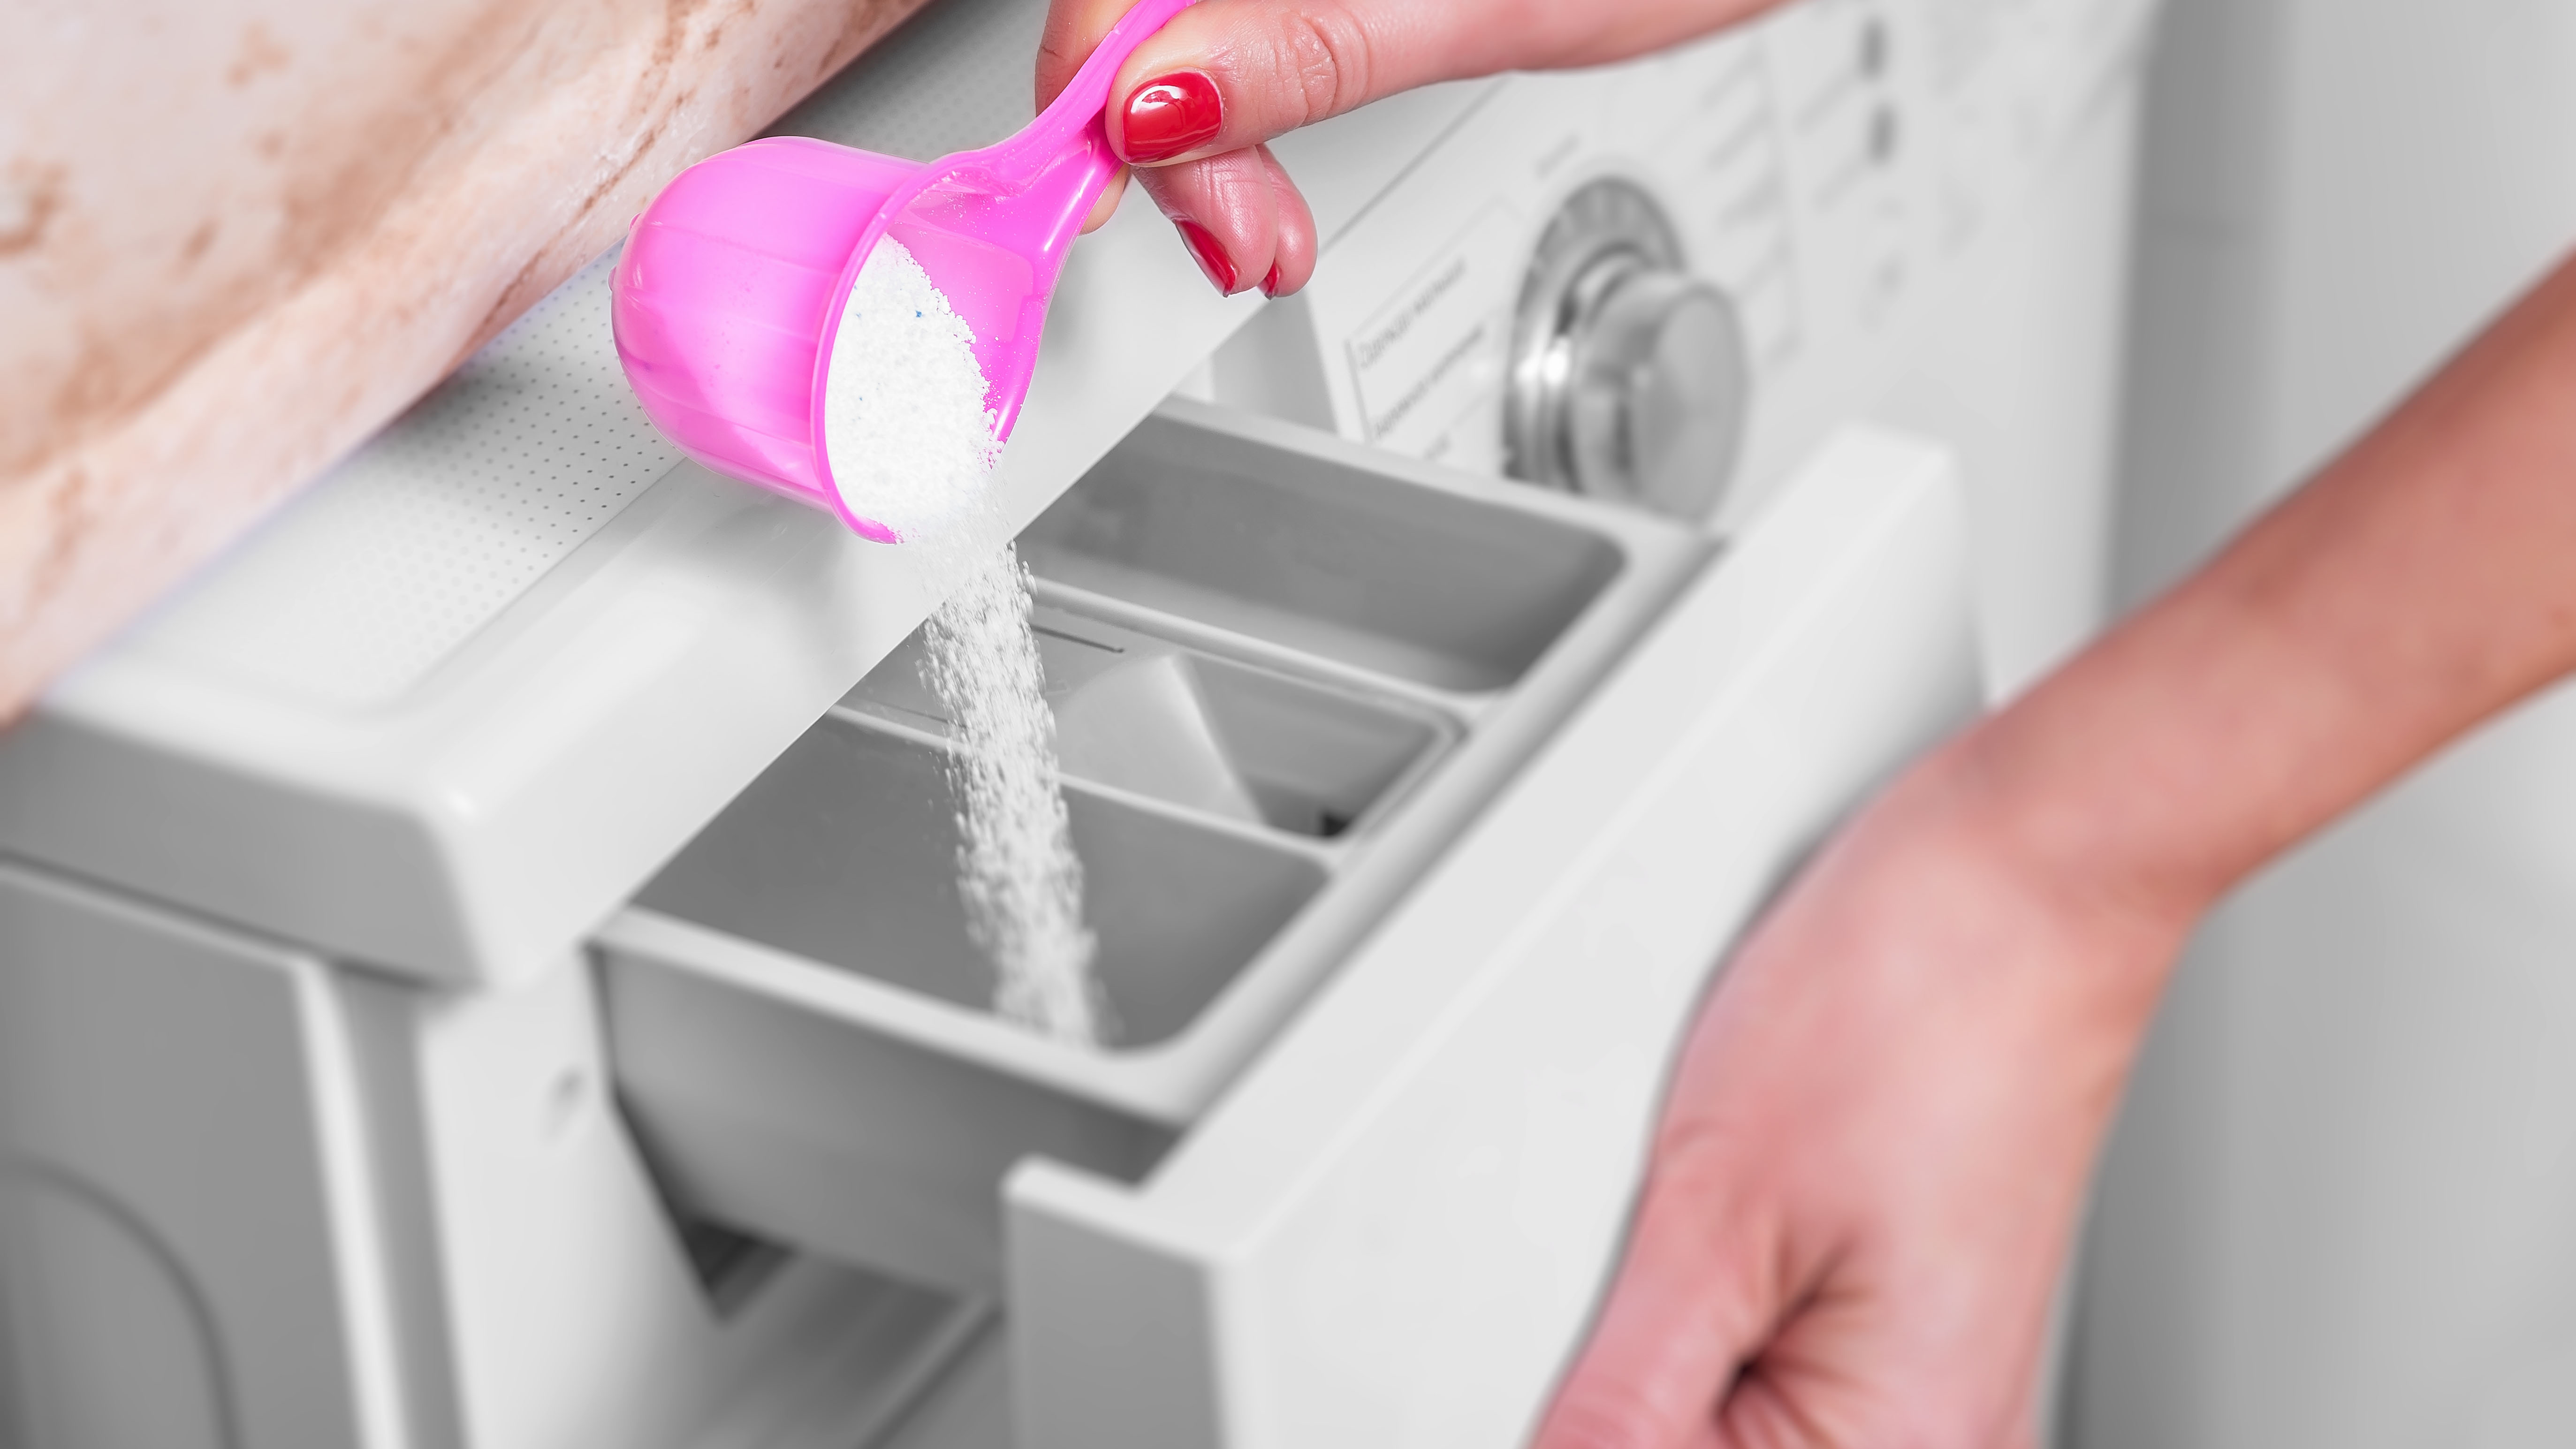 A scoop filled with washing powder is placed in the washing machine dispenser drawer